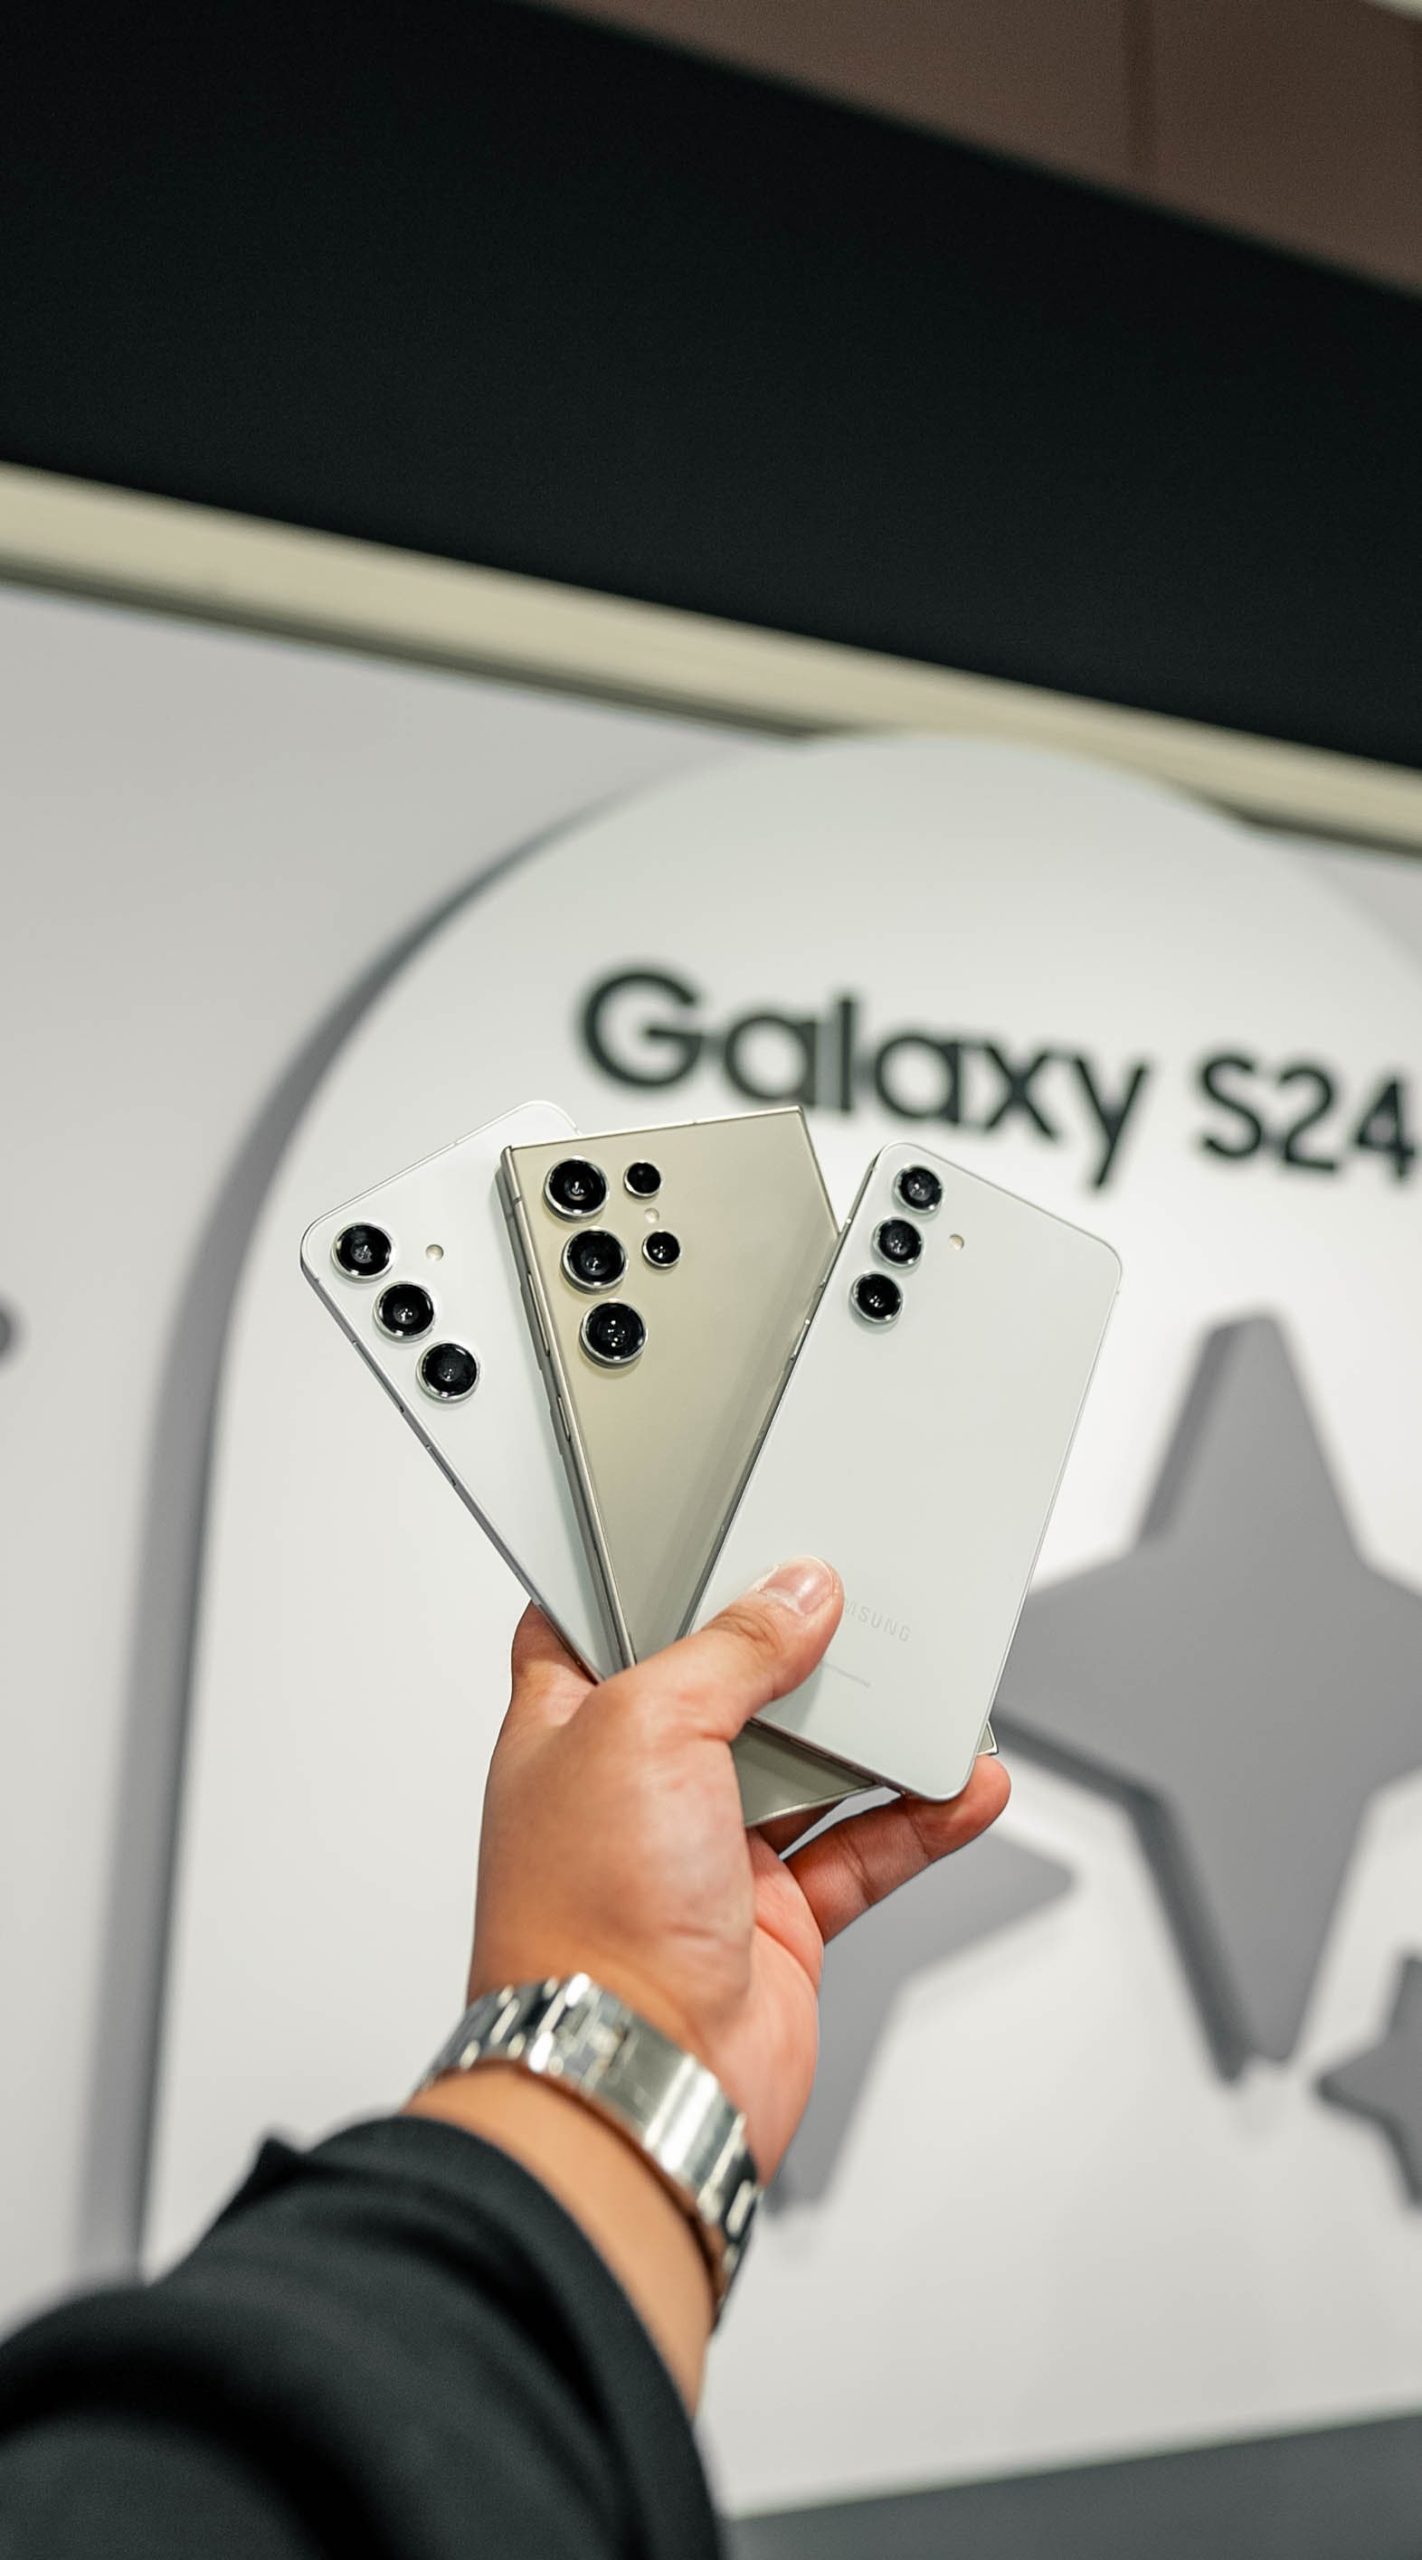 New Era of Mobile AI as Samsung Galaxy S24 Series is Launched